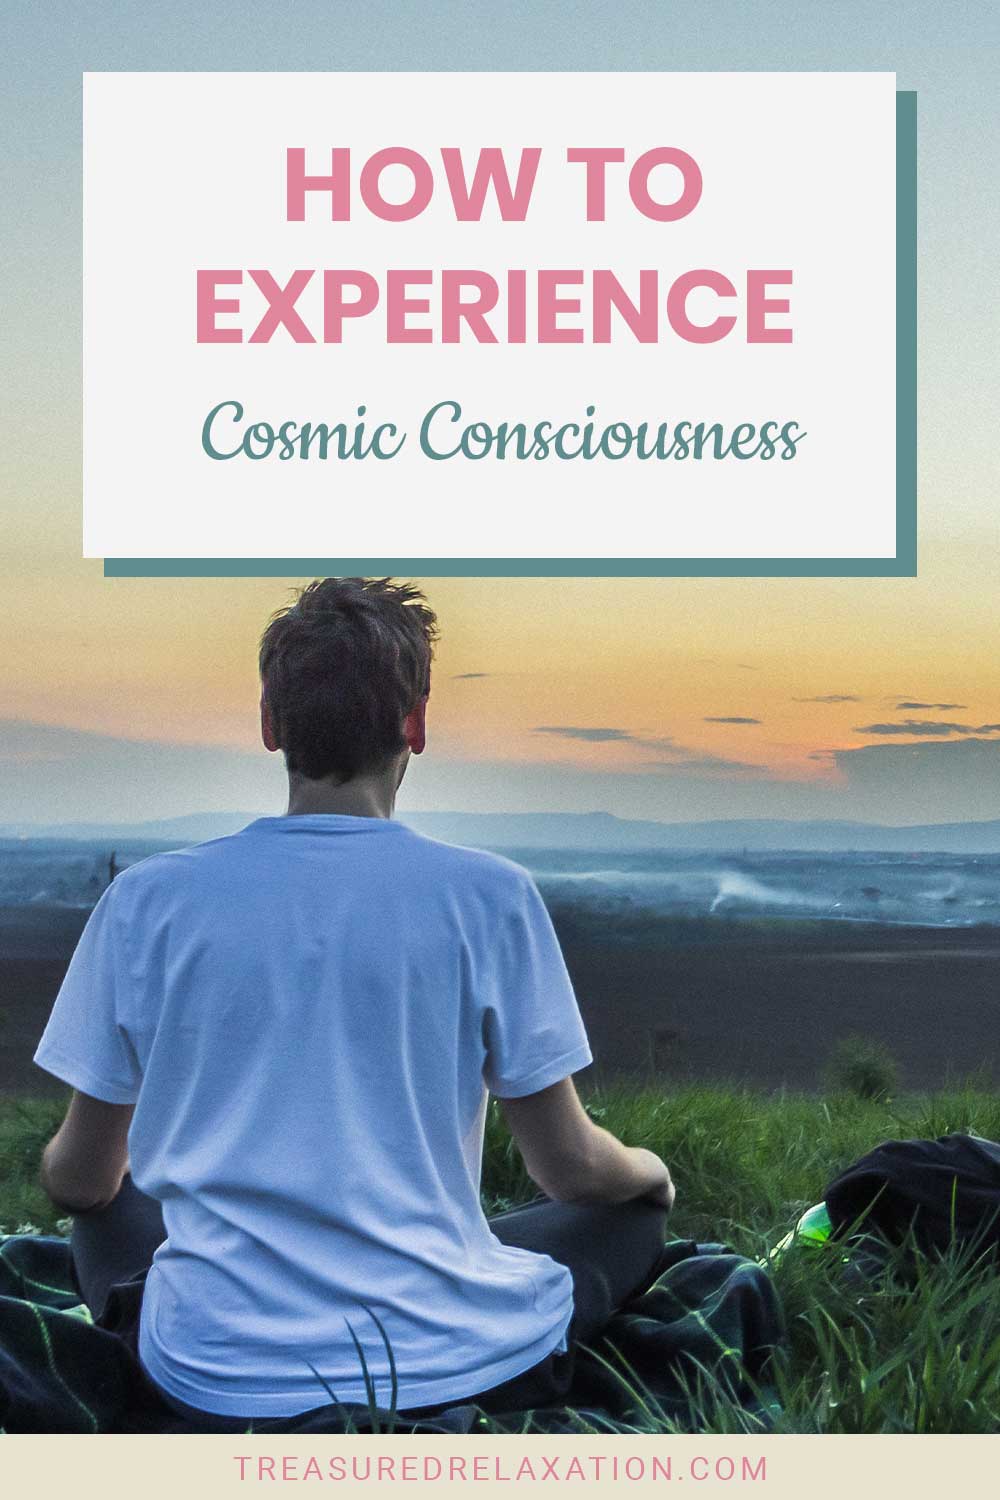 How to Experience Cosmic Consciousness